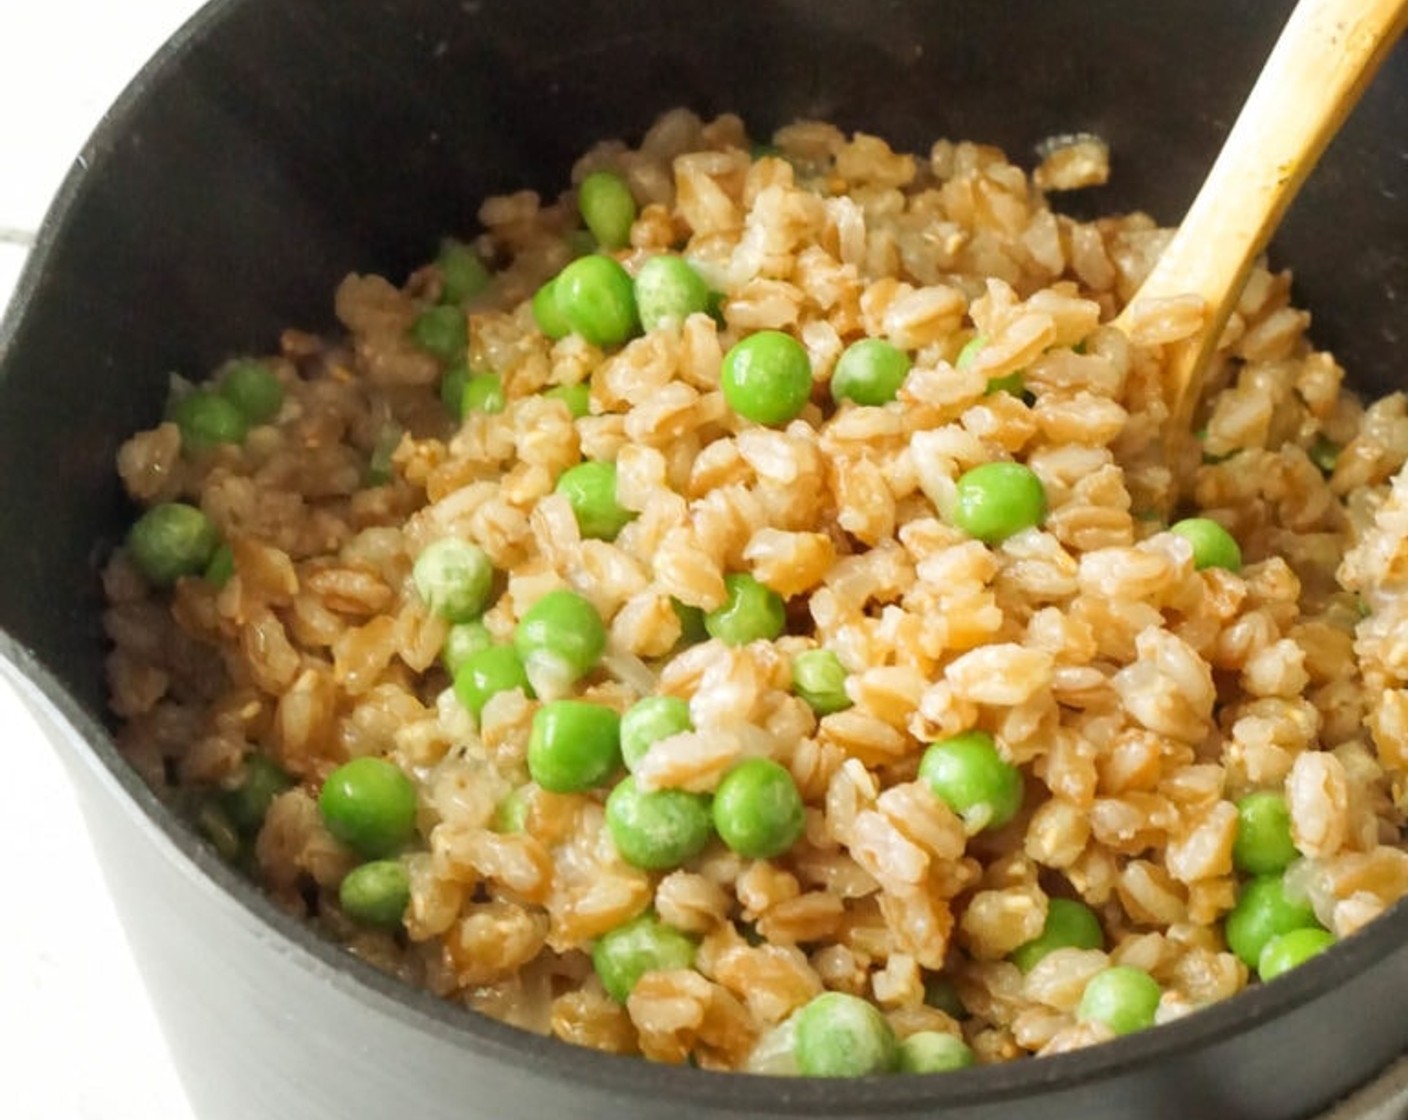 step 9 Once the farro is cooked, remove from the heat and stir in the Frozen Green Peas (1/2 cup). Season with Garlic Salt (to taste) and Ground Black Pepper (to taste), tasting and adjusting as needed.